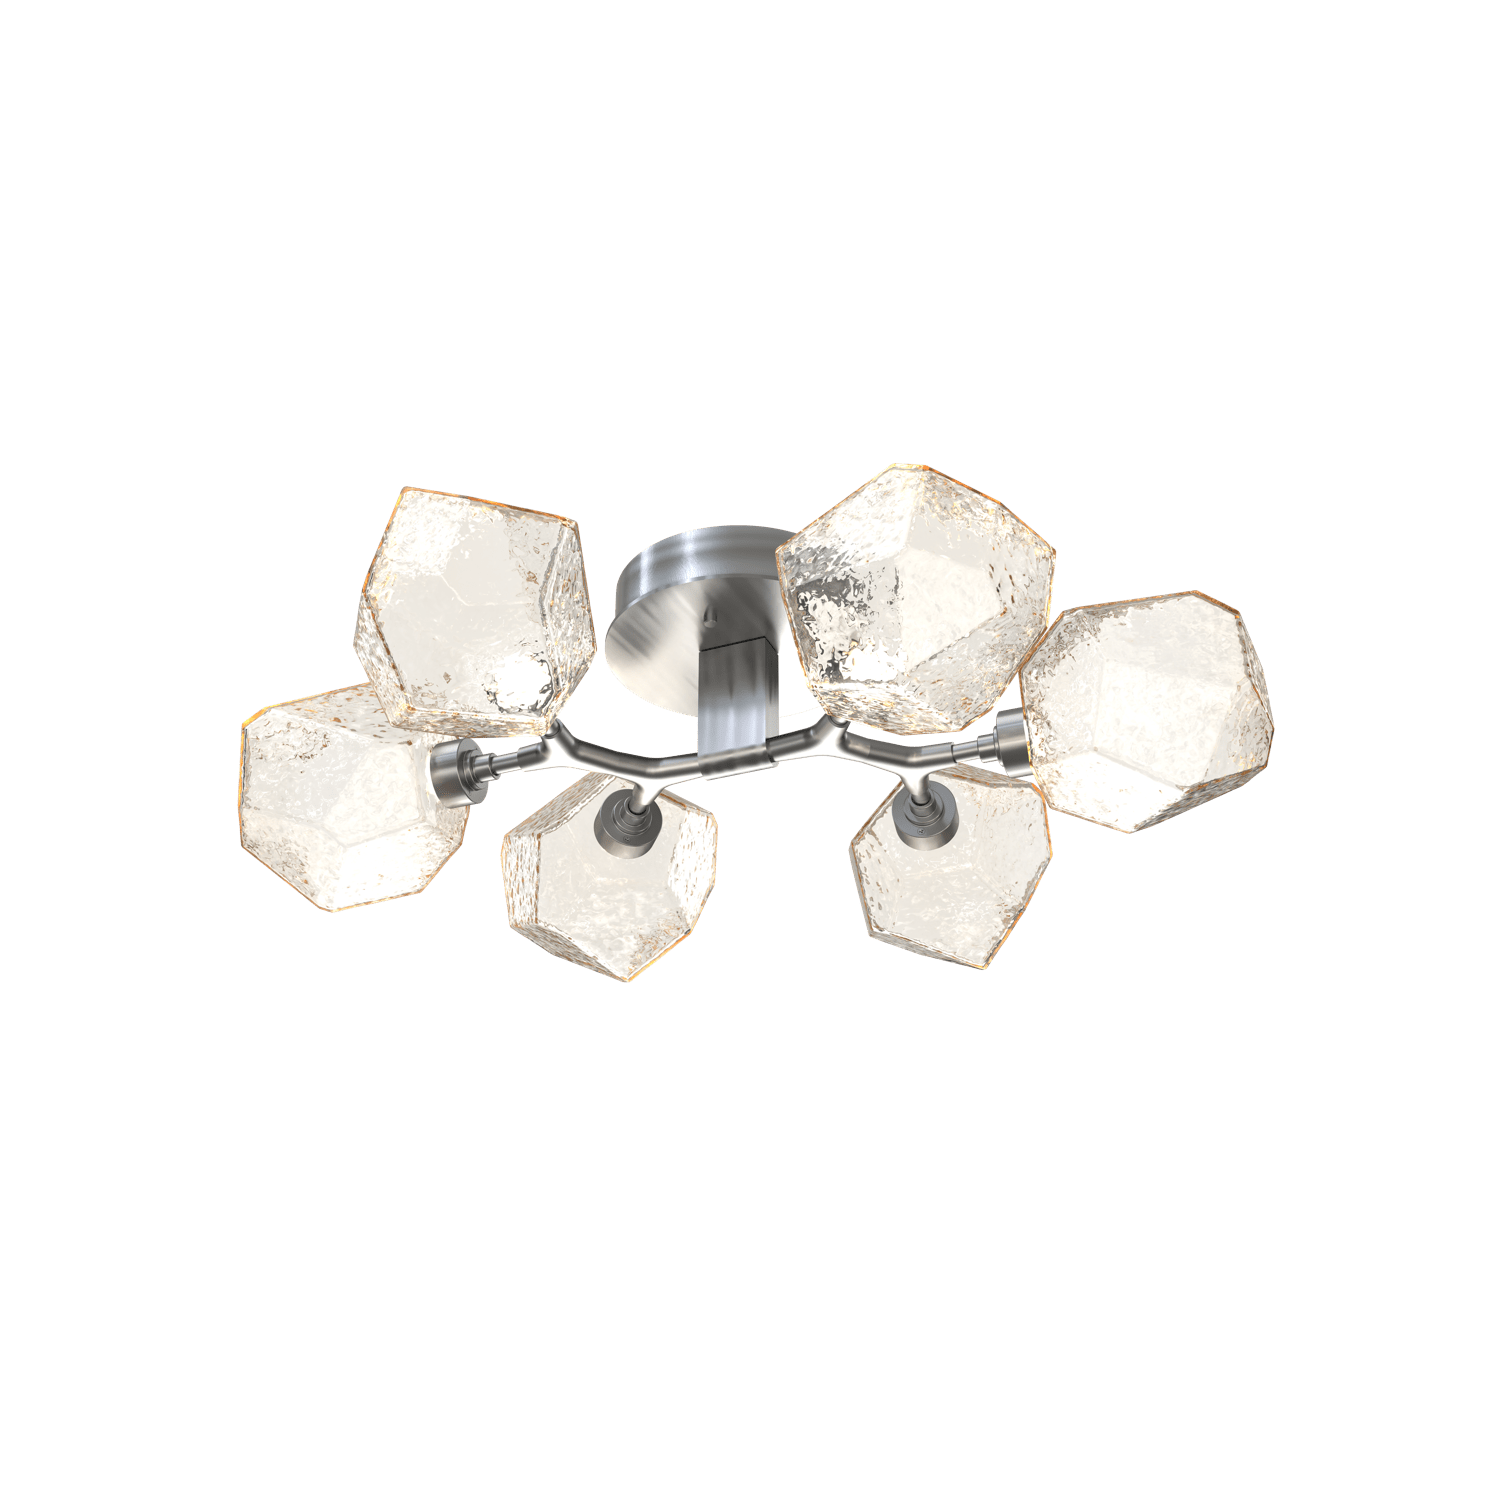 CLB0039-01-SN-A-Hammerton-Studio-Gem-6-light-organic-flush-mount-light-with-satin-nickel-finish-and-amber-blown-glass-shades-and-LED-lamping